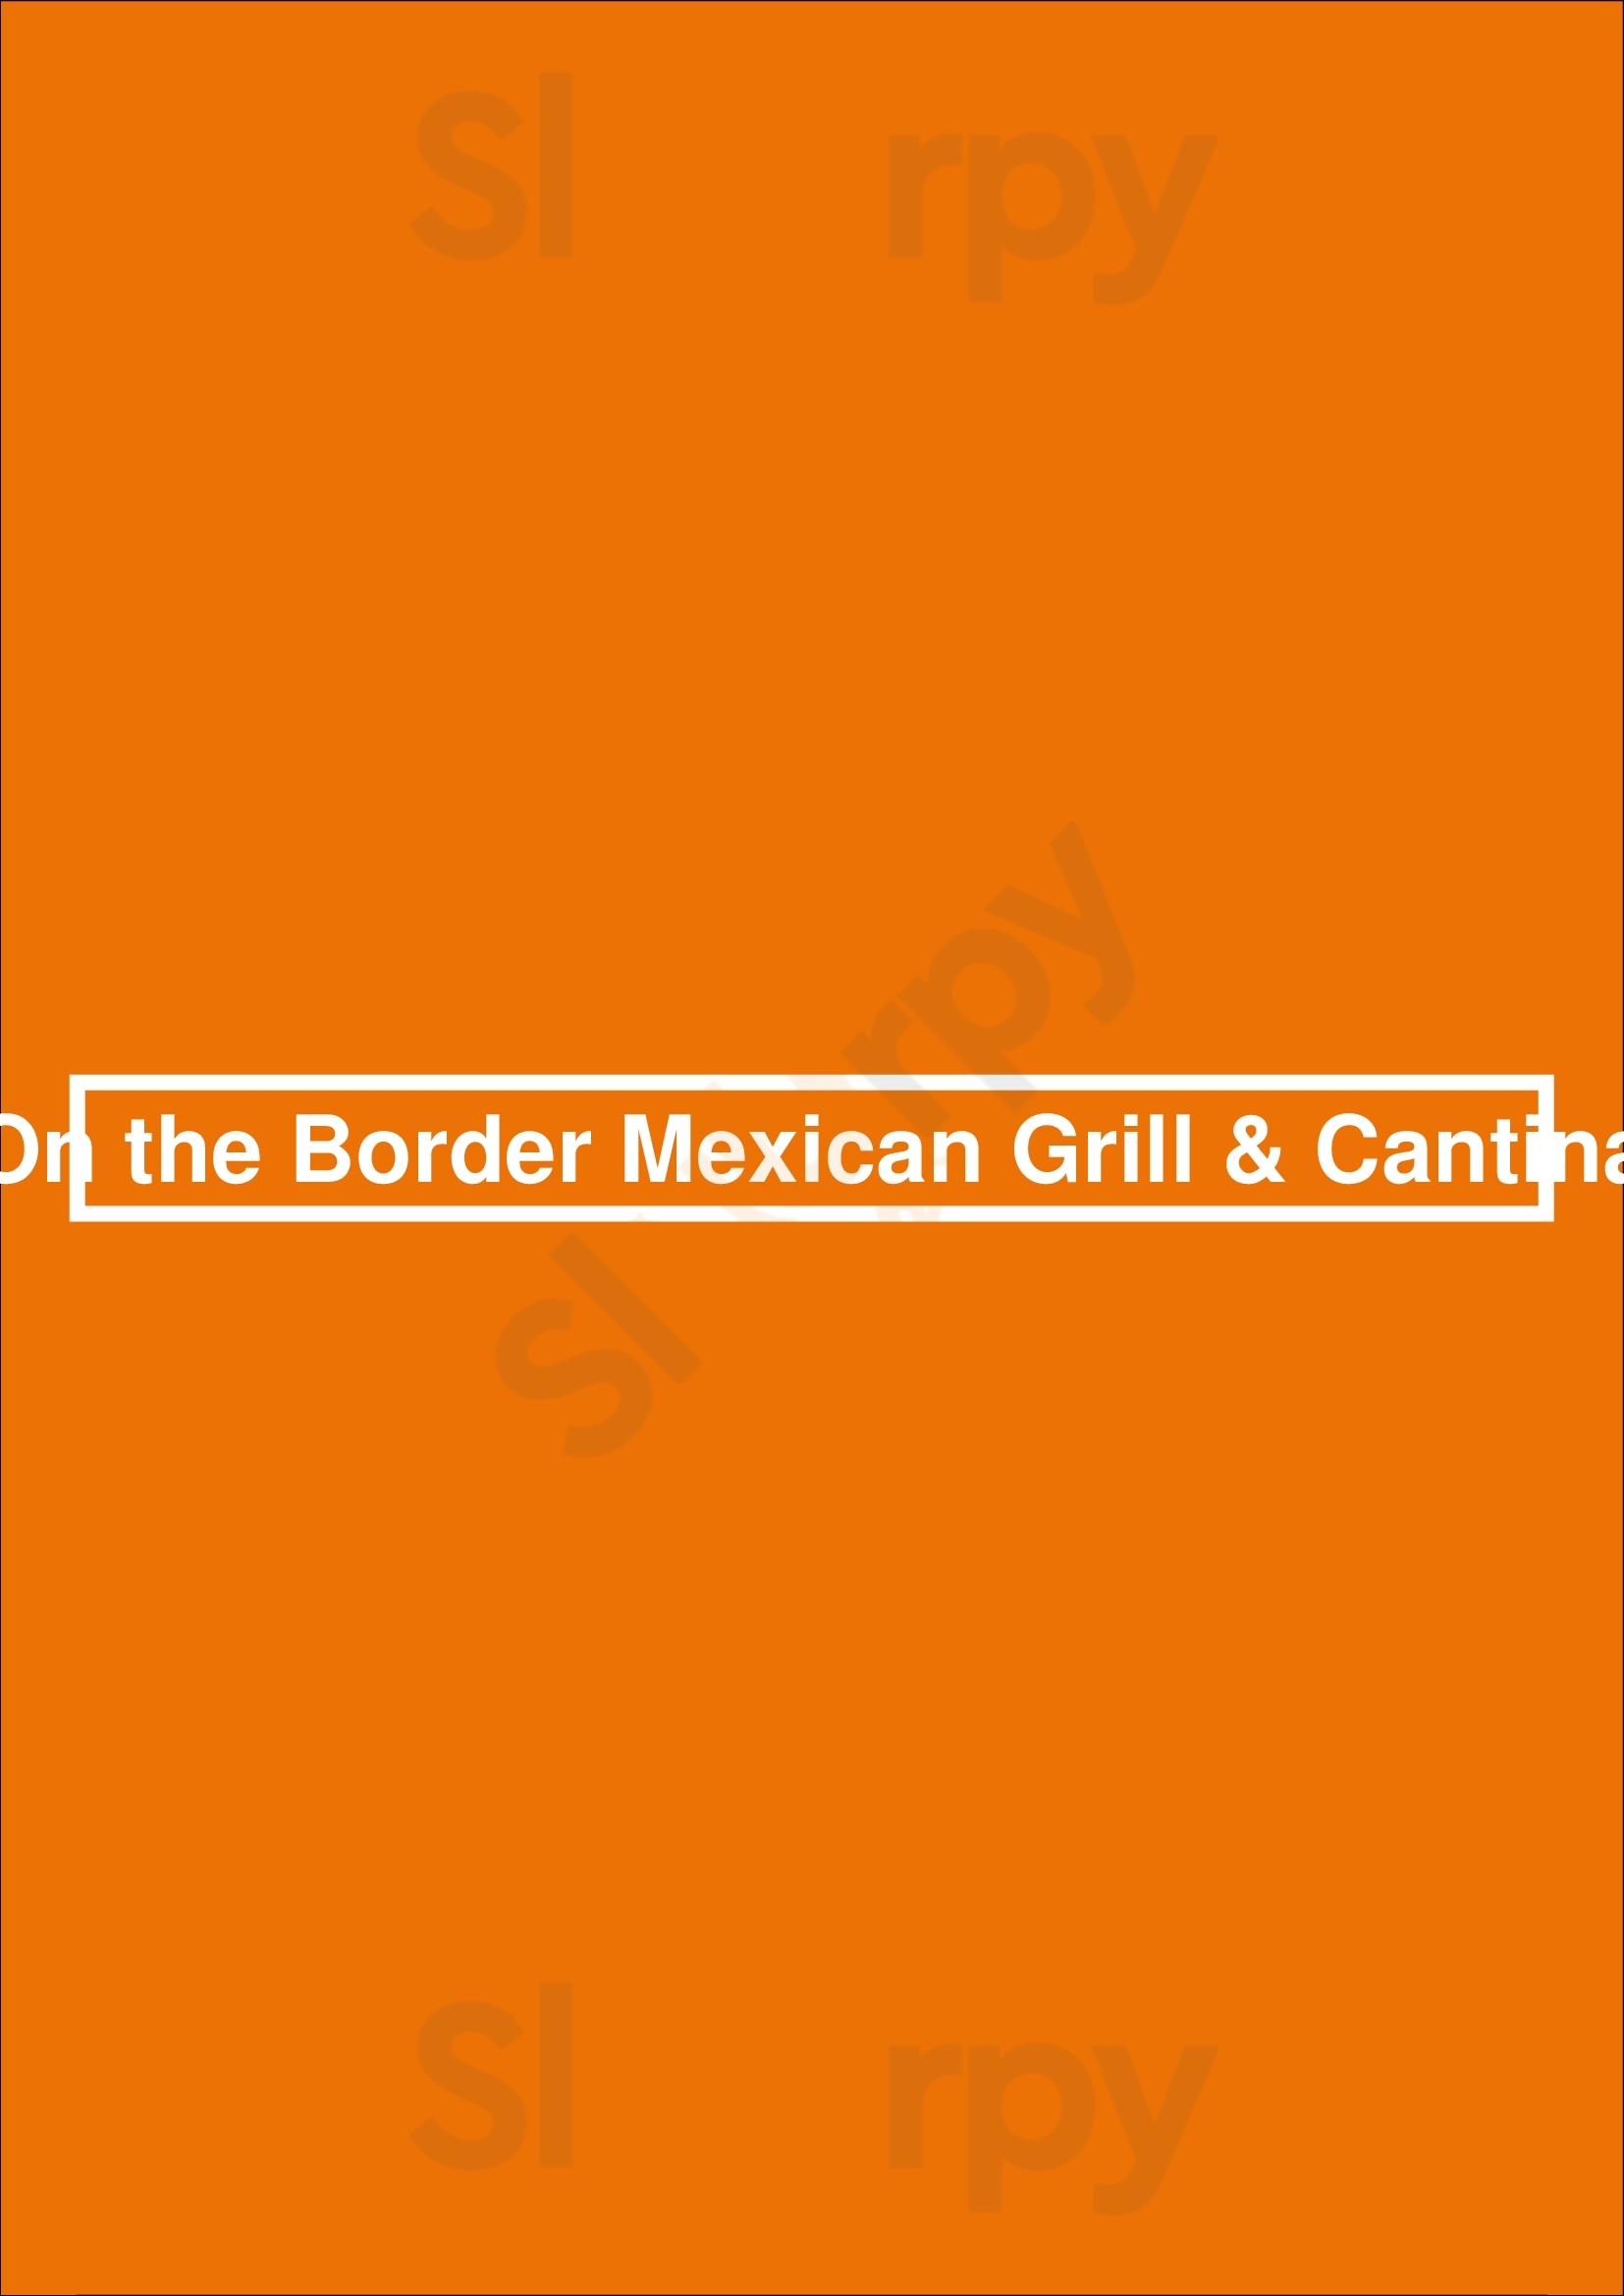 On The Border Mexican Grill & Cantina Charlotte Menu - 1